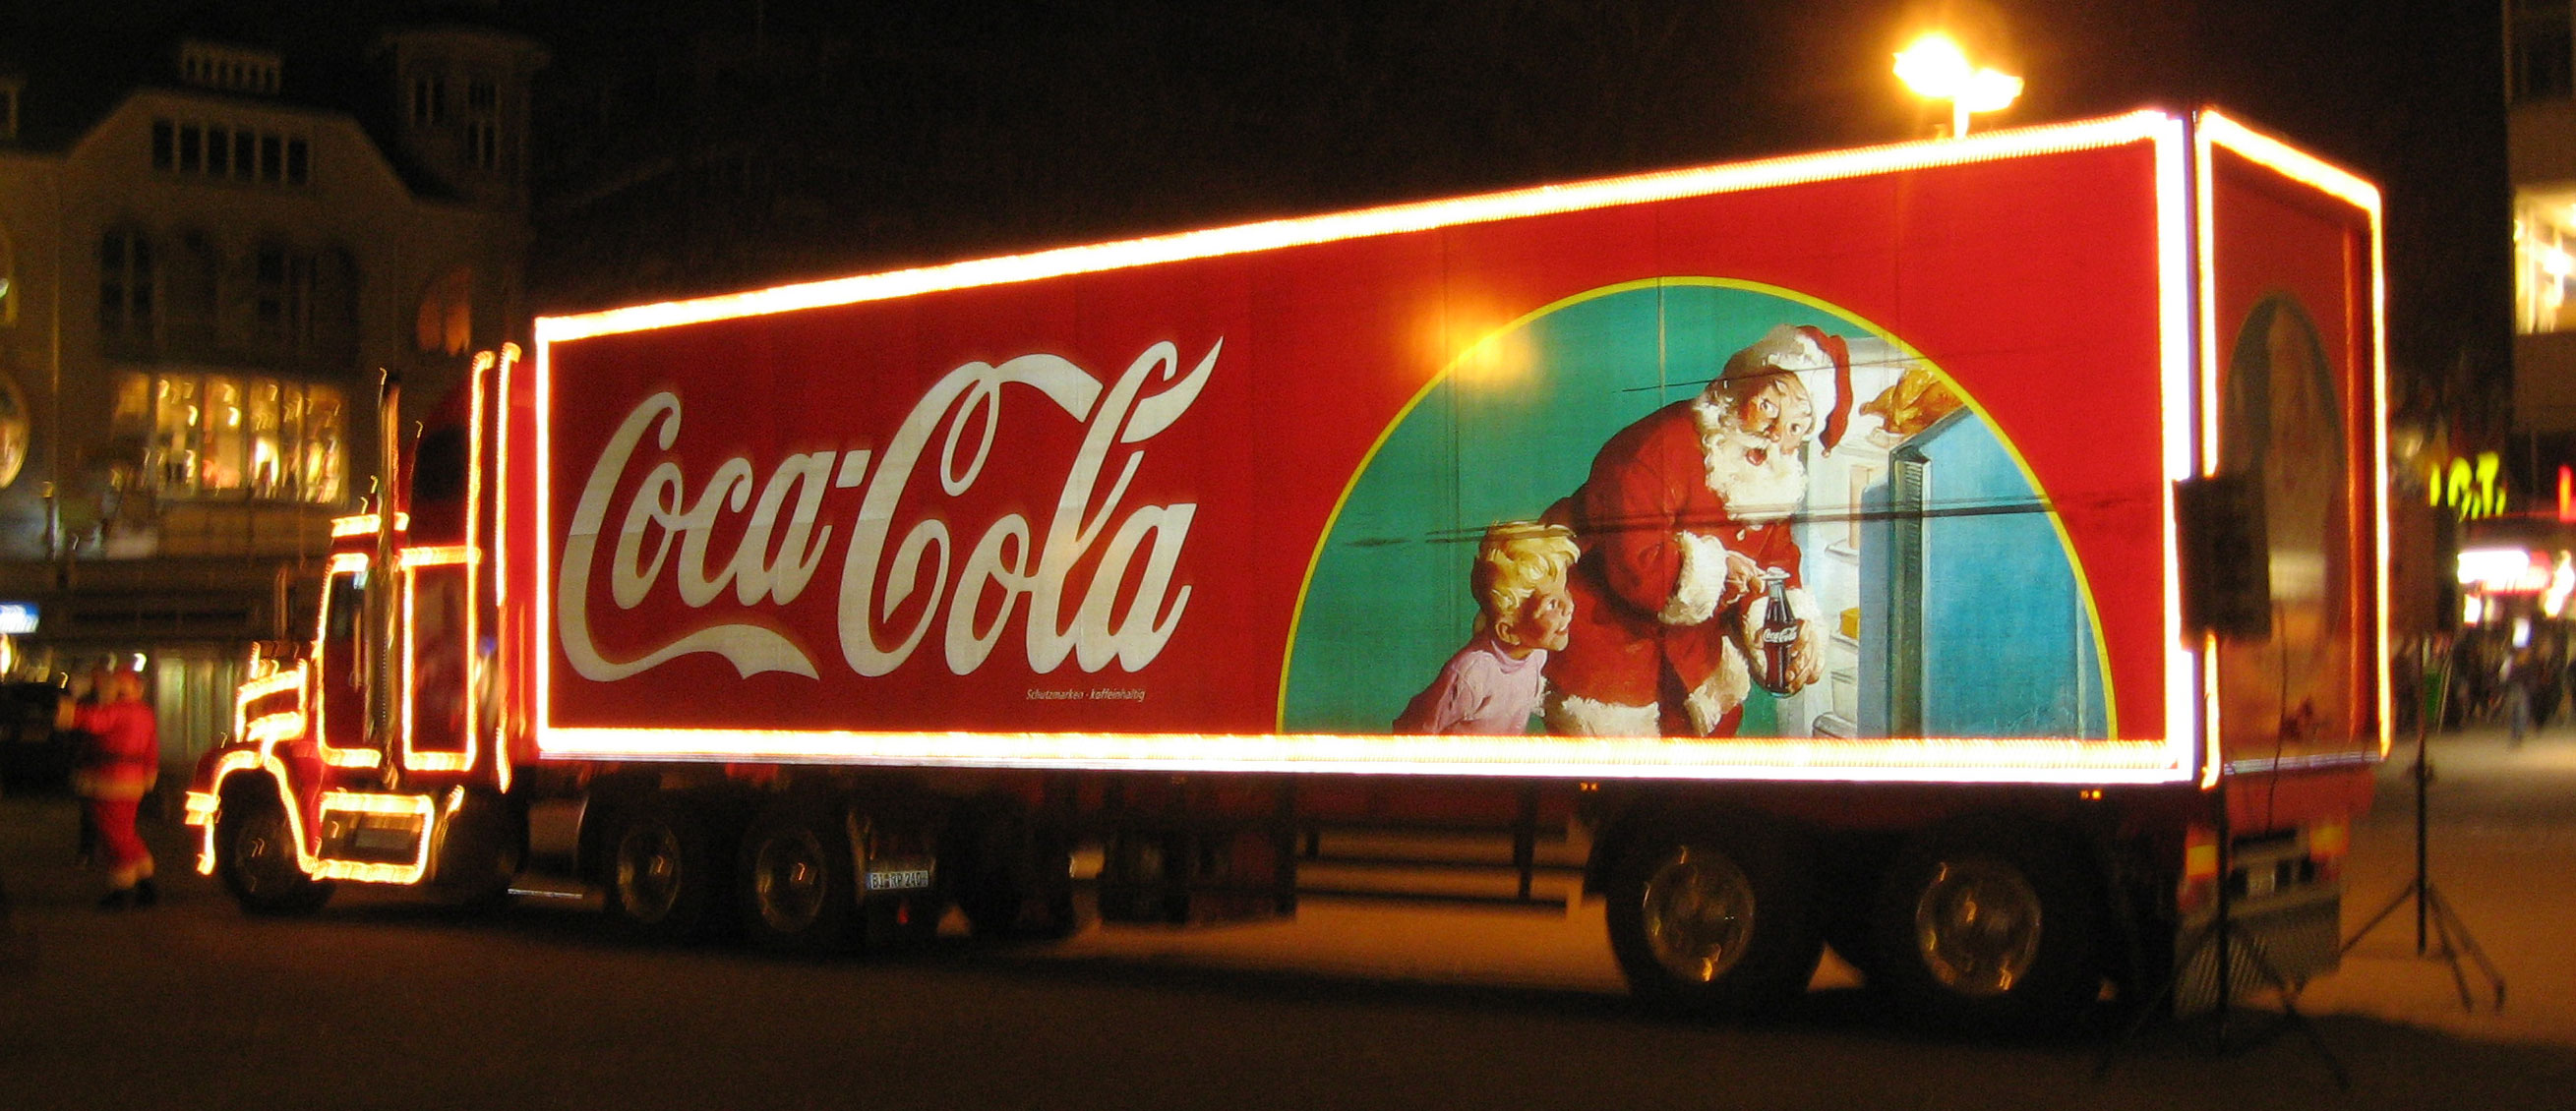 Coca Cola truck with Santa's image on it.